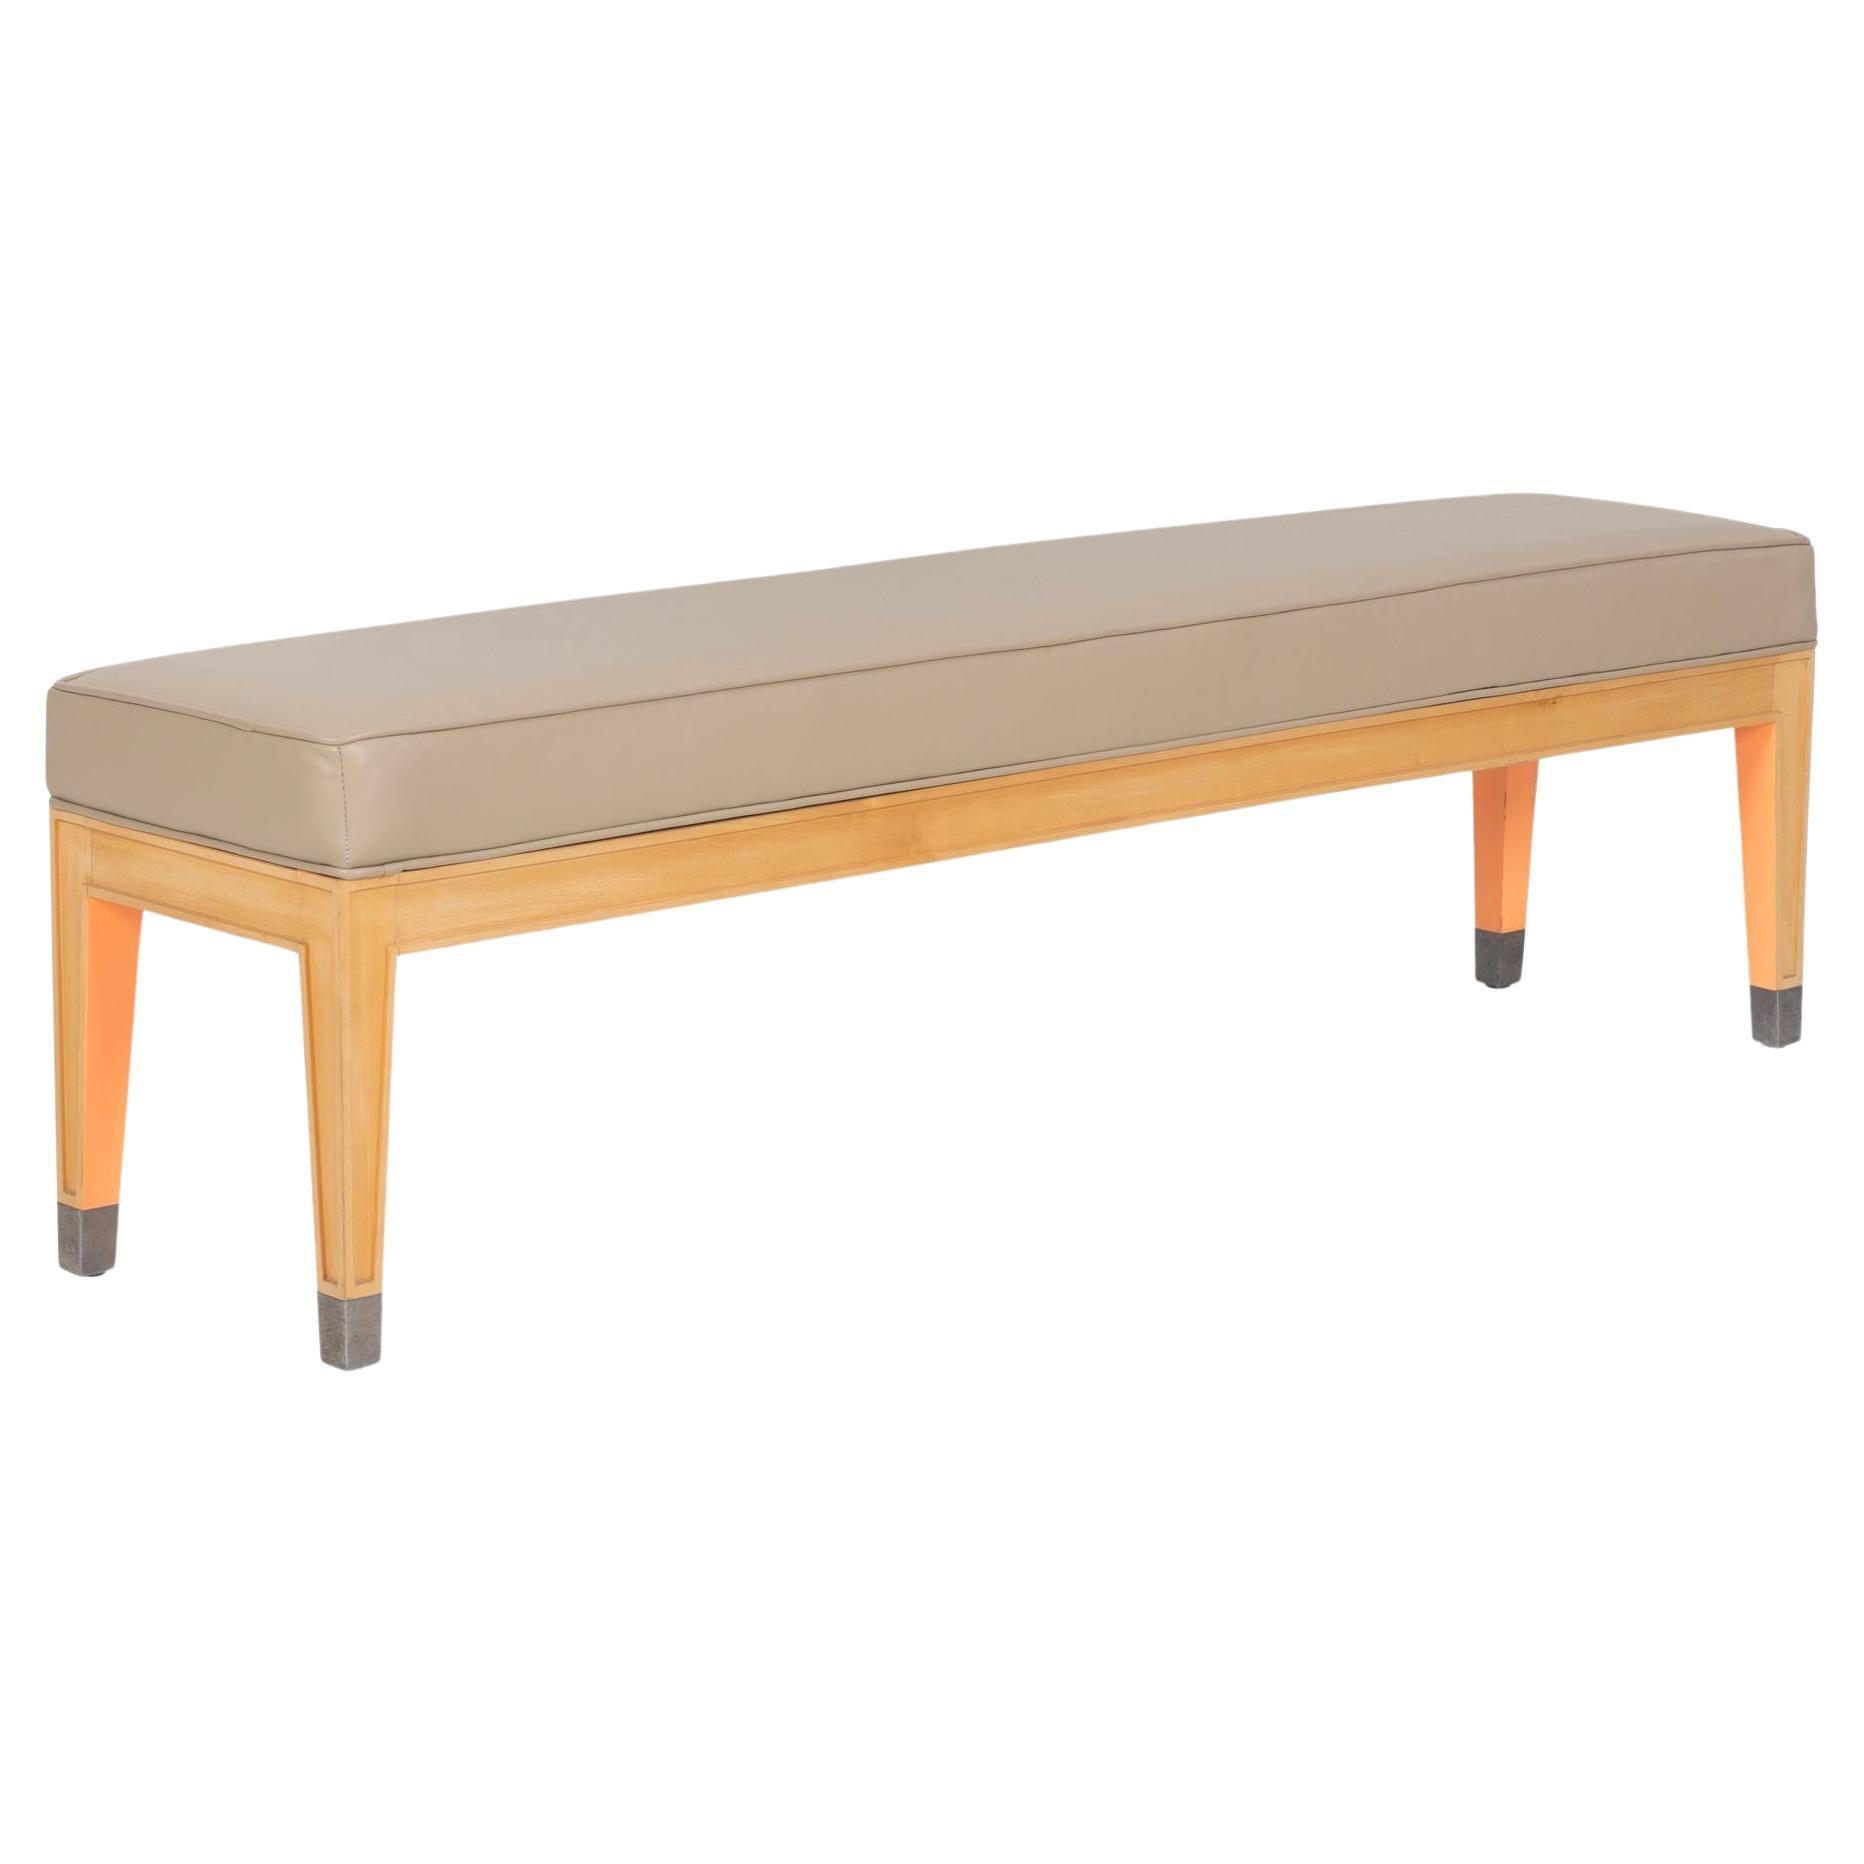 Phillipe Starck Bench from The Clift Hotel San Fransisco C.A. For Sale